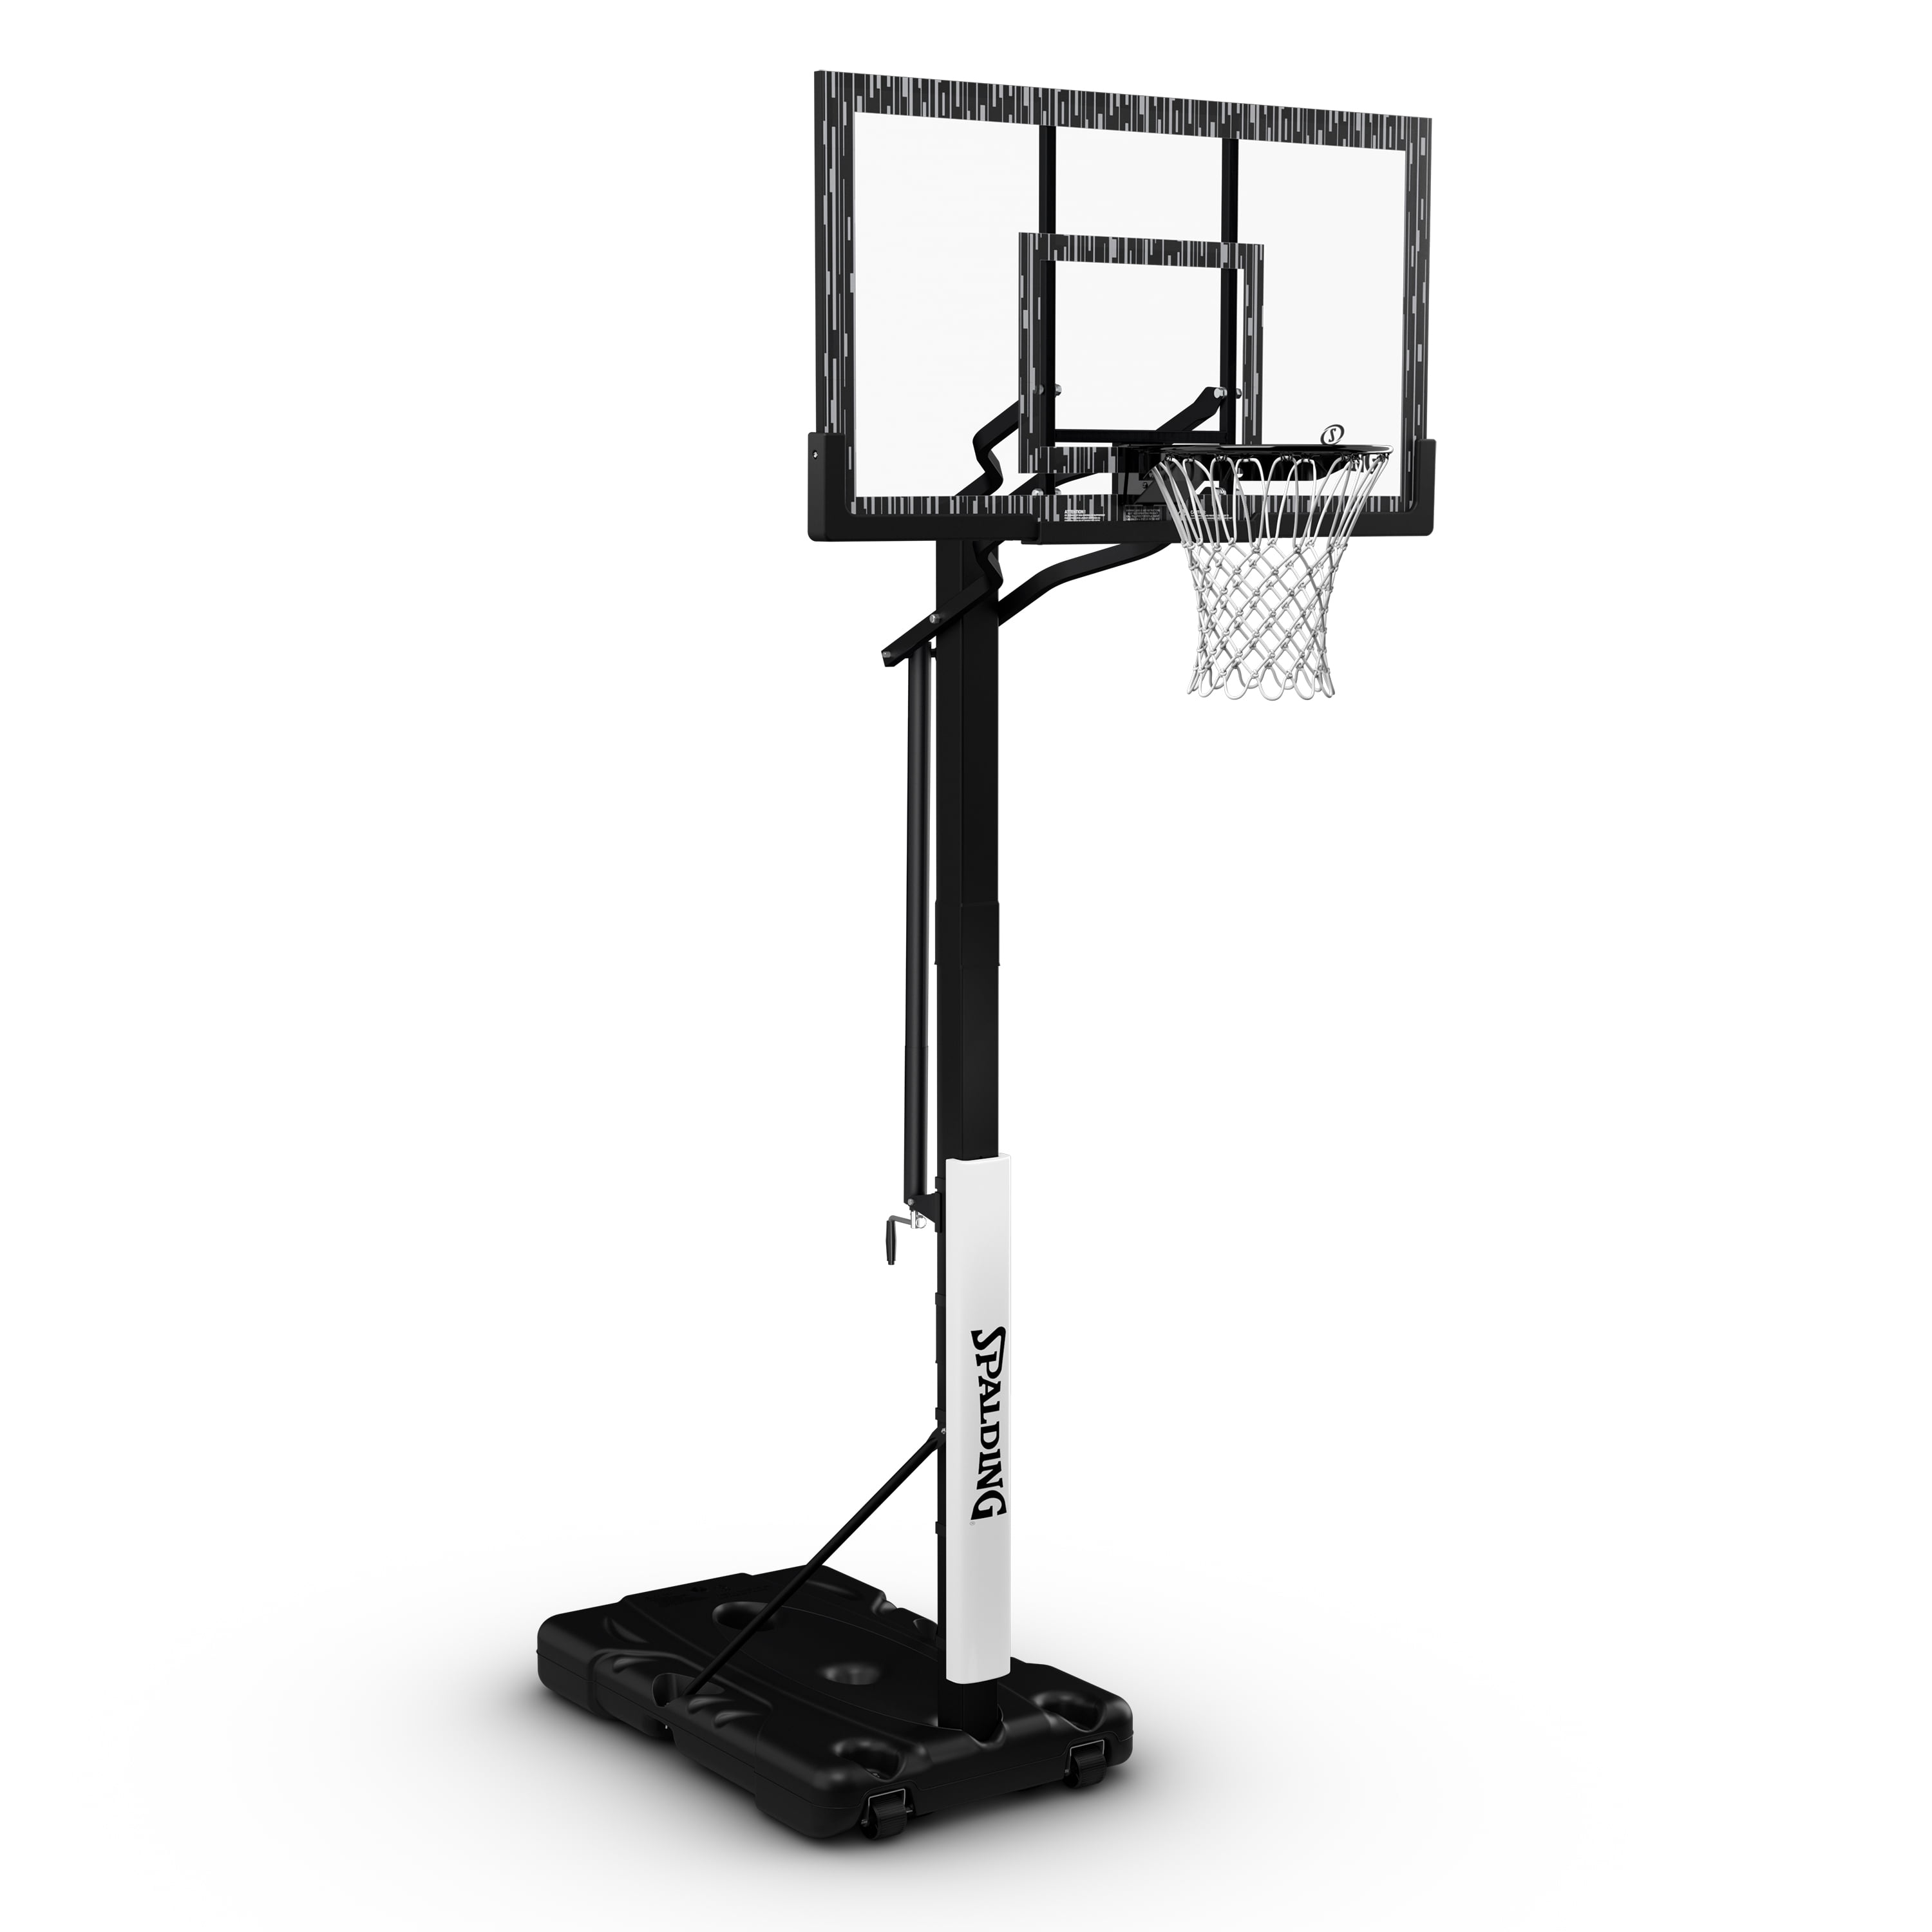 Backboard System 2.4M-3M Basketball Hoop Stand Portable Height Adjustable 